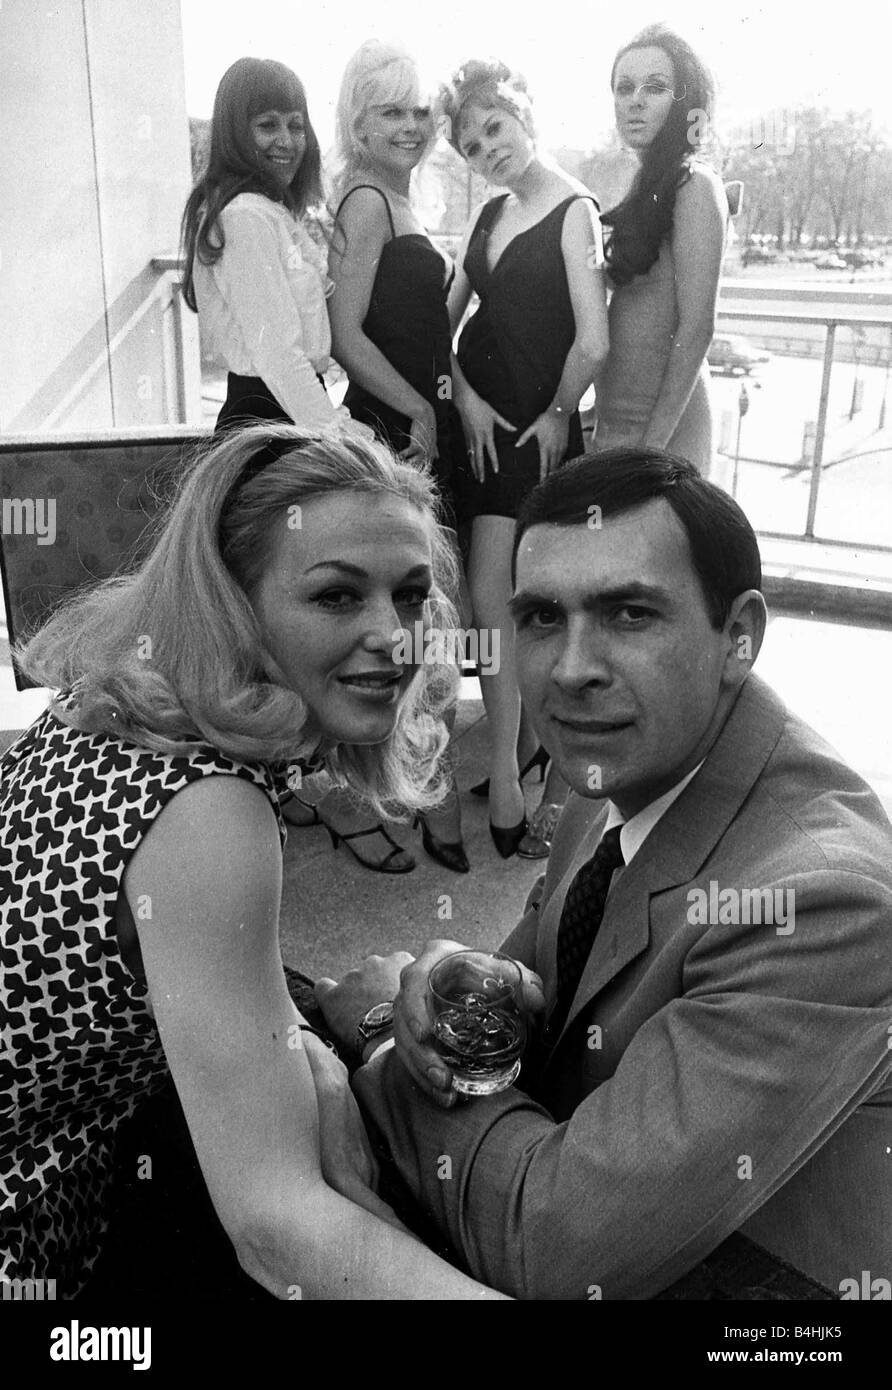 Actor Neil Connery actor brother of Sean Connery and ex plasterer 1968 with wife Eleanor Connery and girls from the film Operation Kid Brother Stock Photo